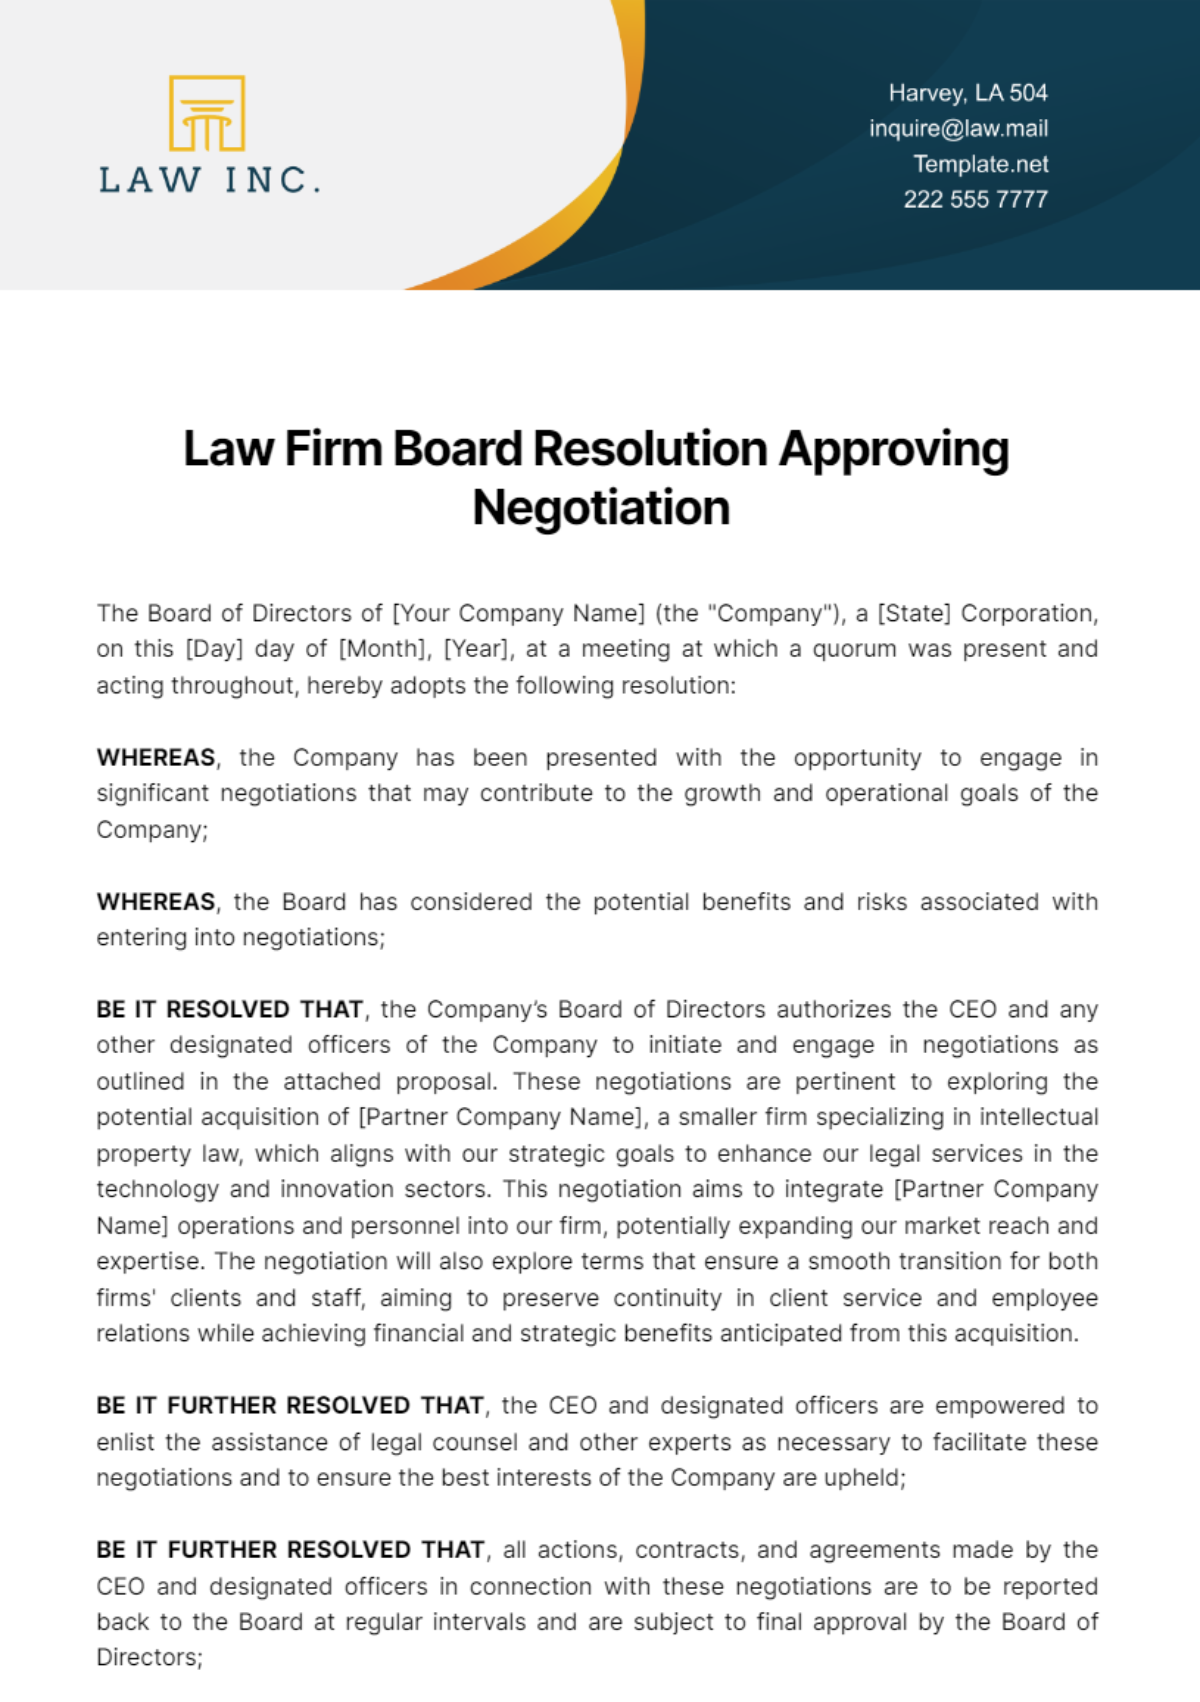 Free Law Firm Board Resolution Approving Negotiation Template